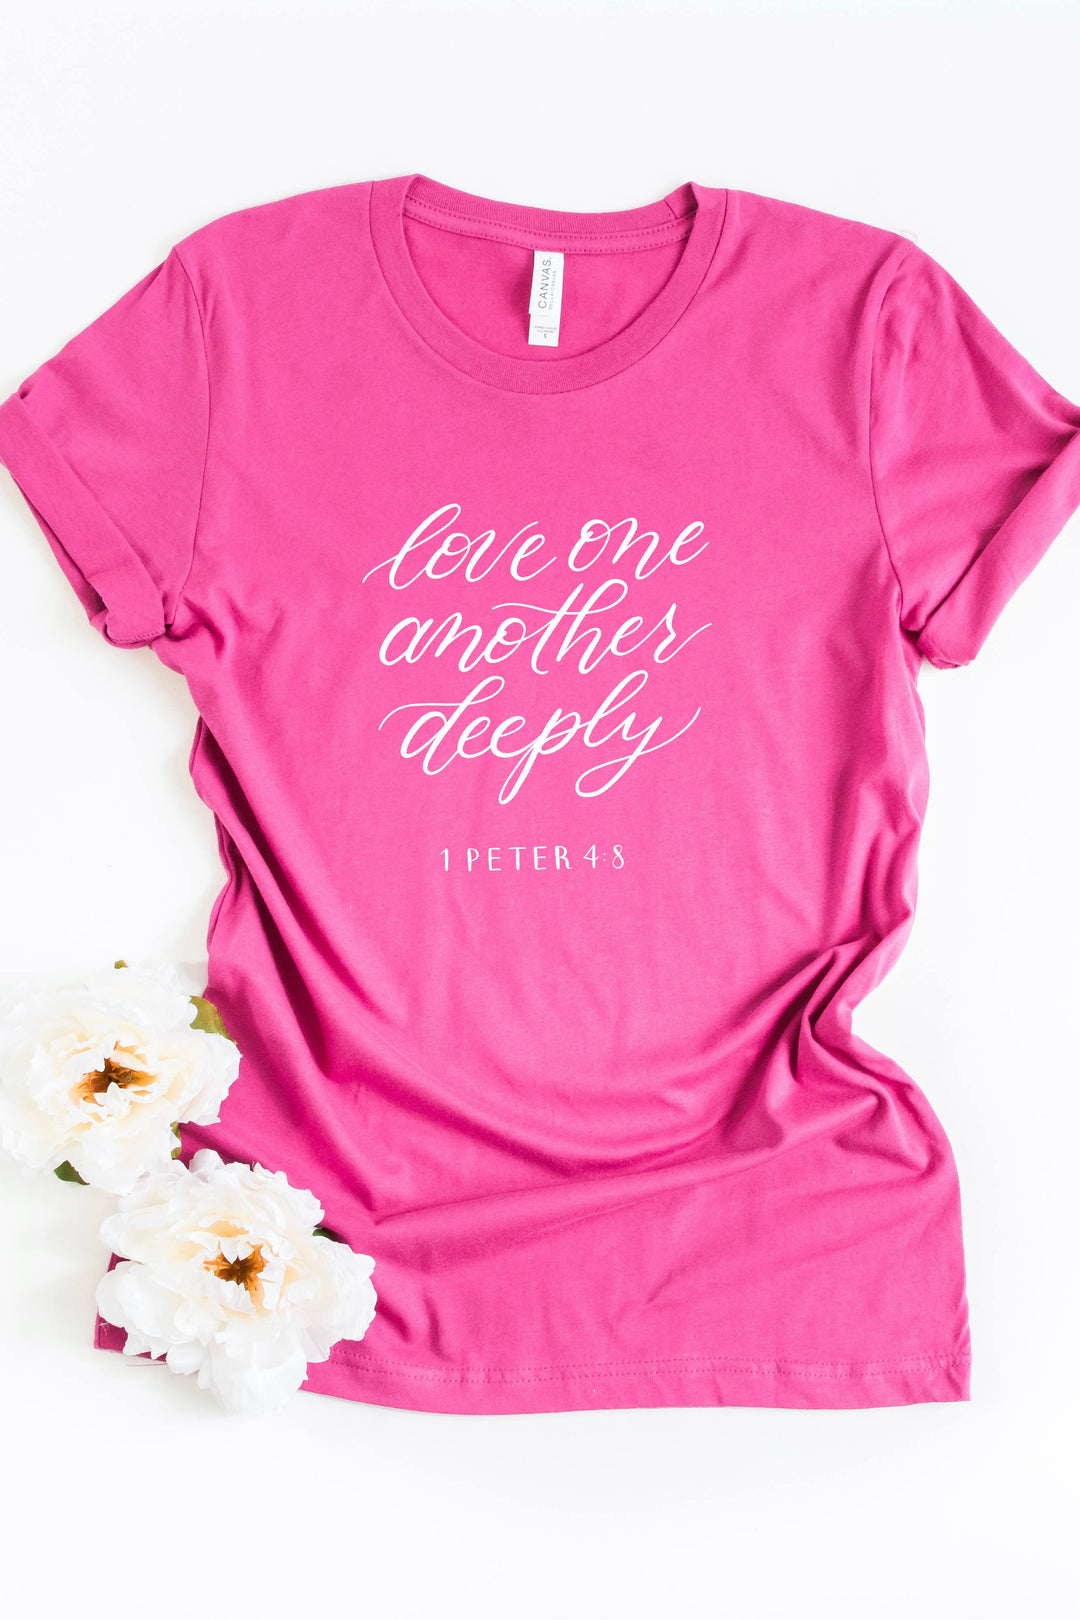 "Love One Another Deeply" Tee